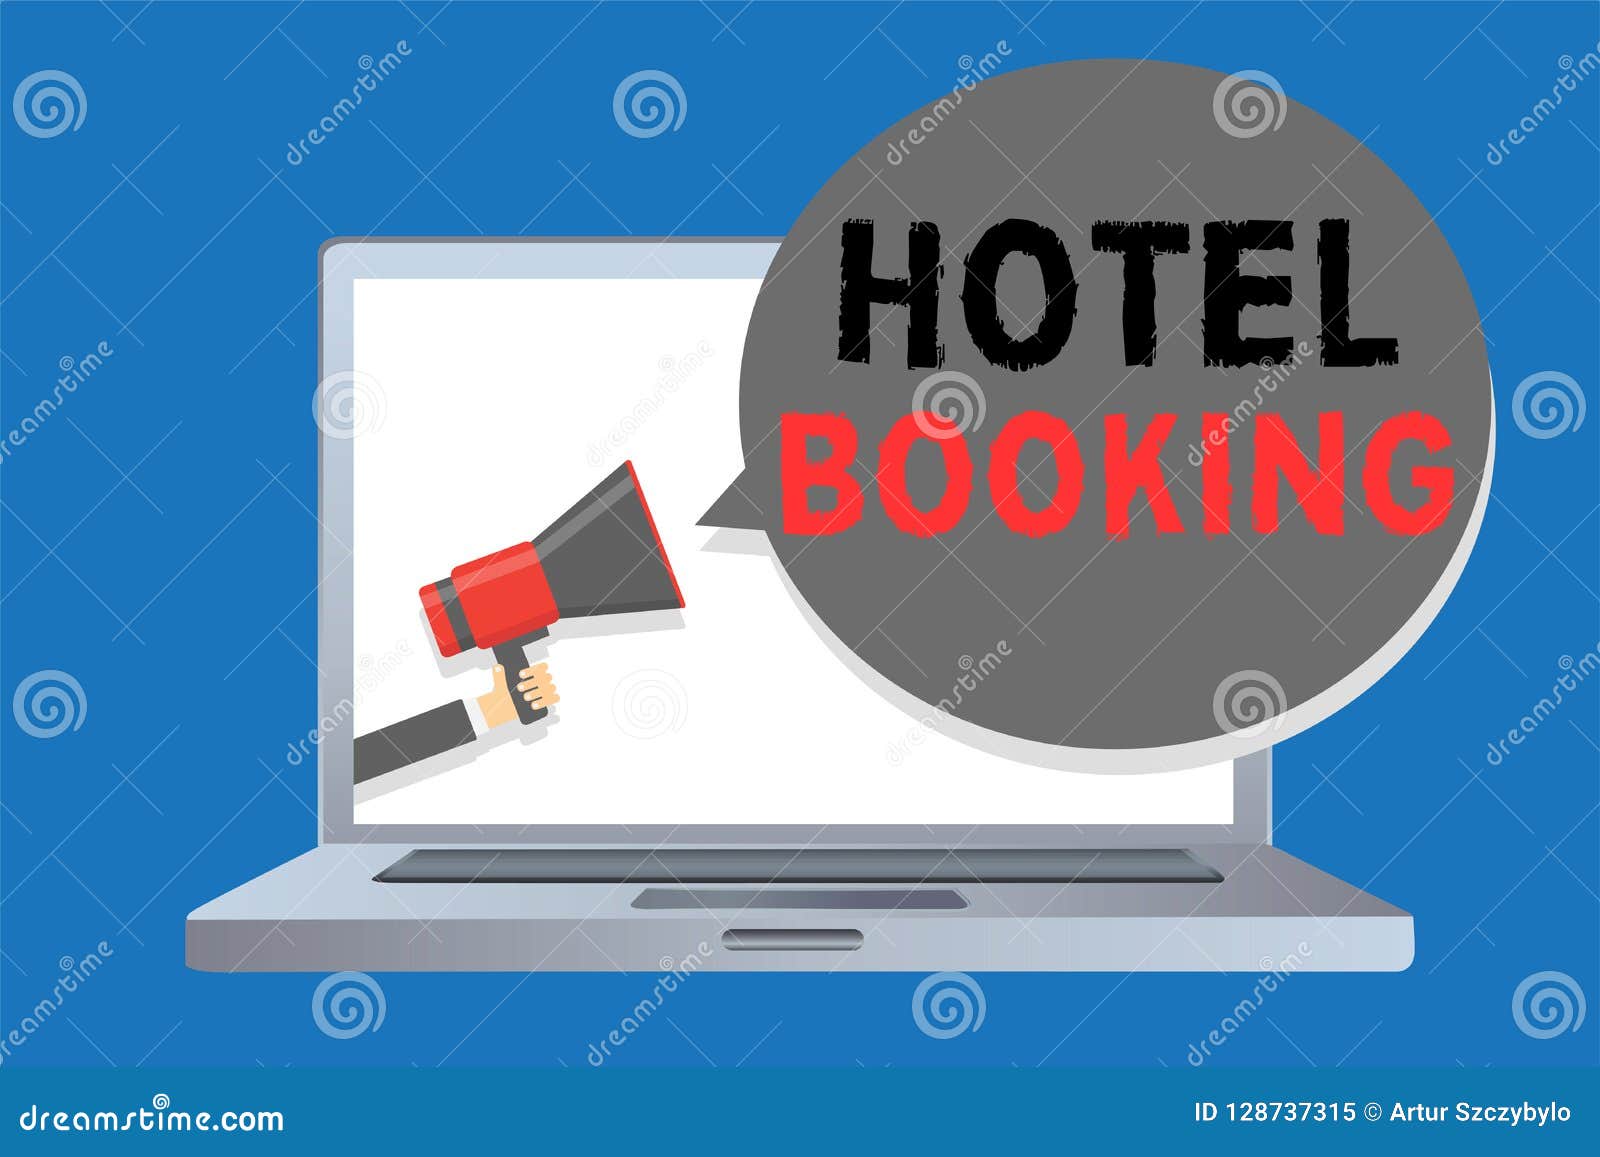 writing note showing hotel booking. business photo showcasing online reservations presidential suite de luxe hospitality